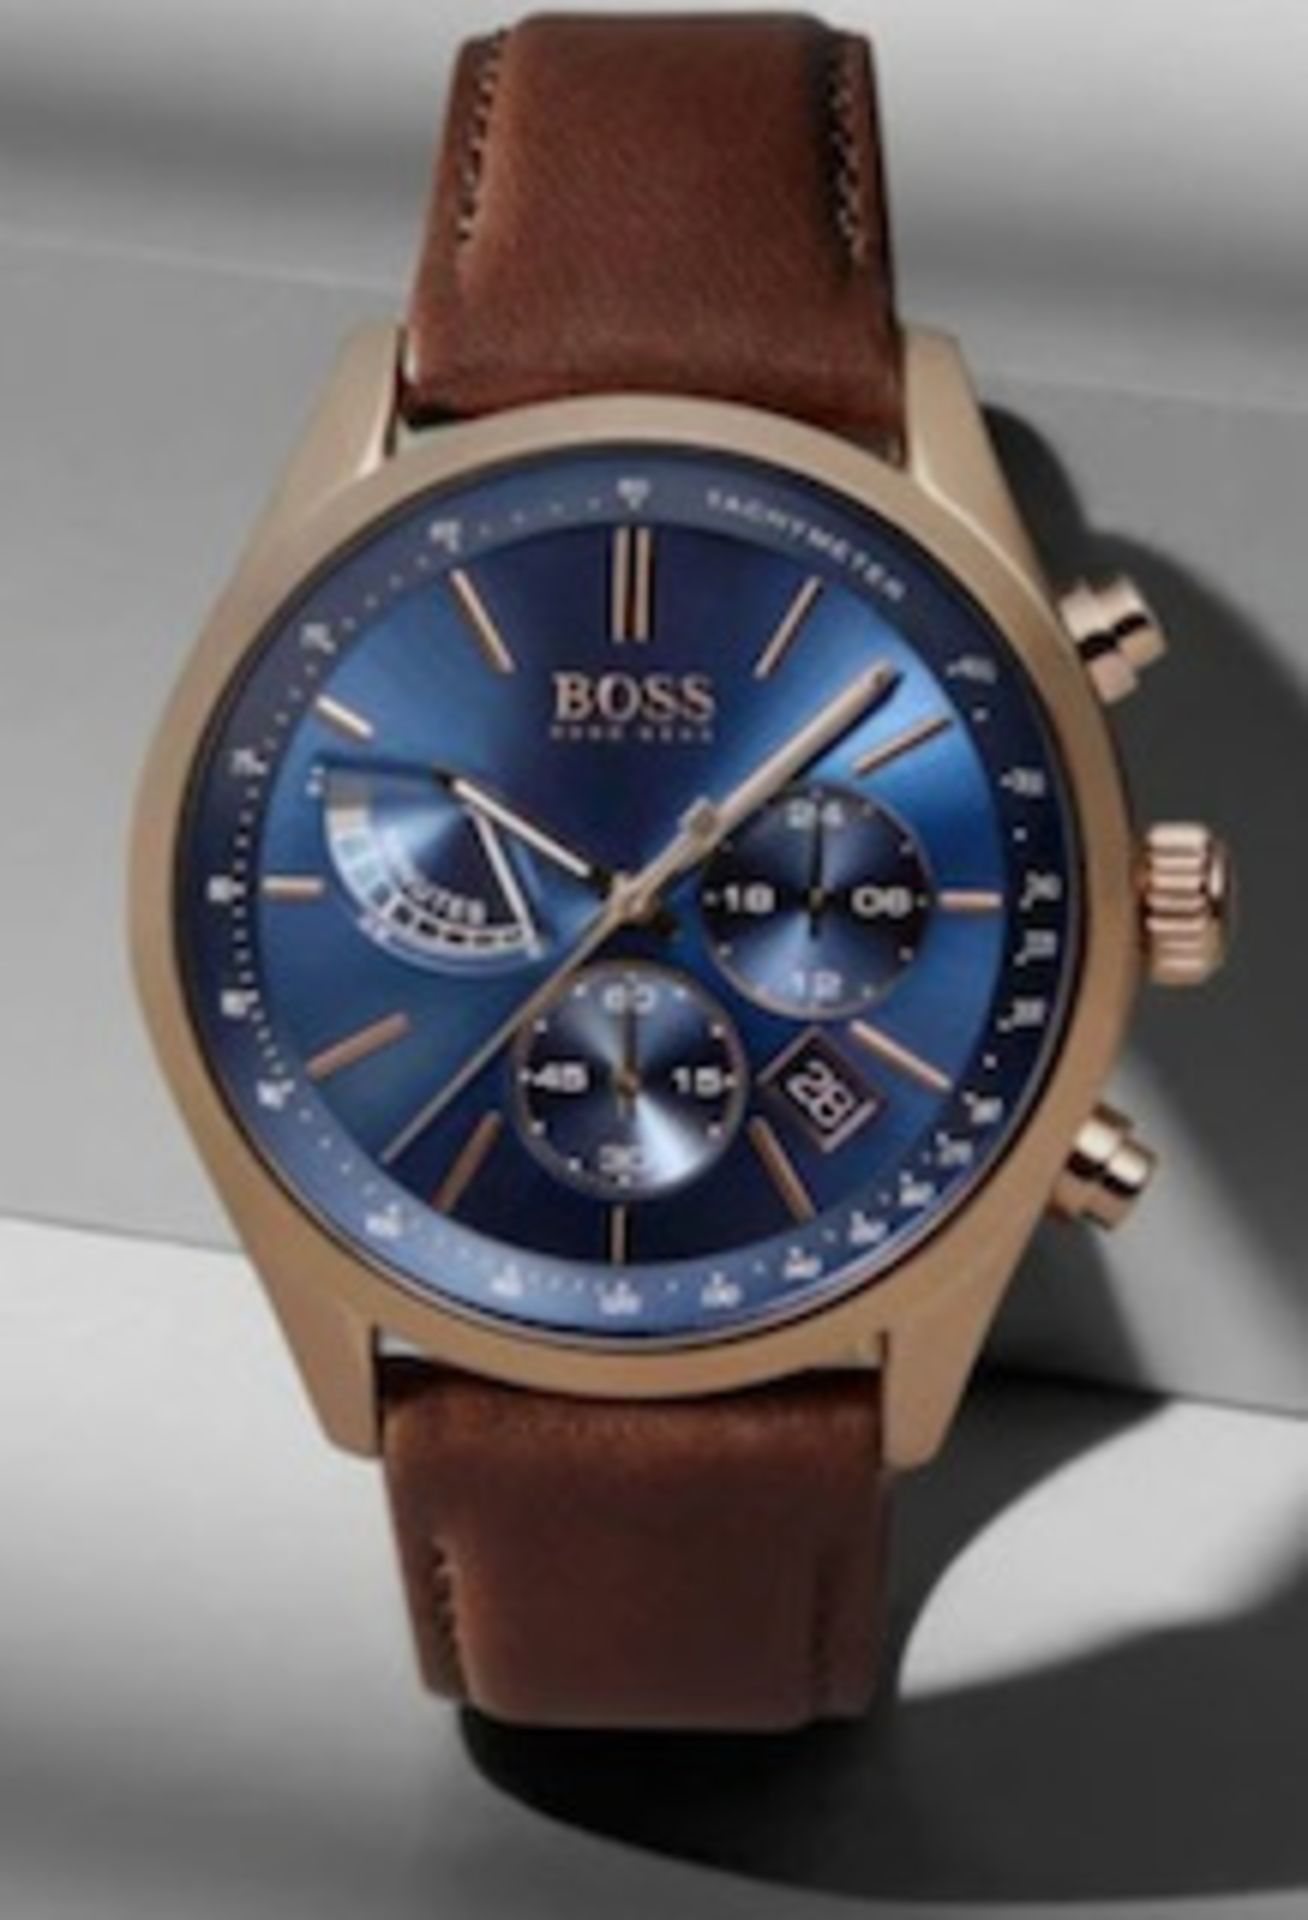 Hugo Boss 1513604 Men's Grand Prix Blue Dial Brown Leather Strap Chronograph Watch - Image 4 of 5